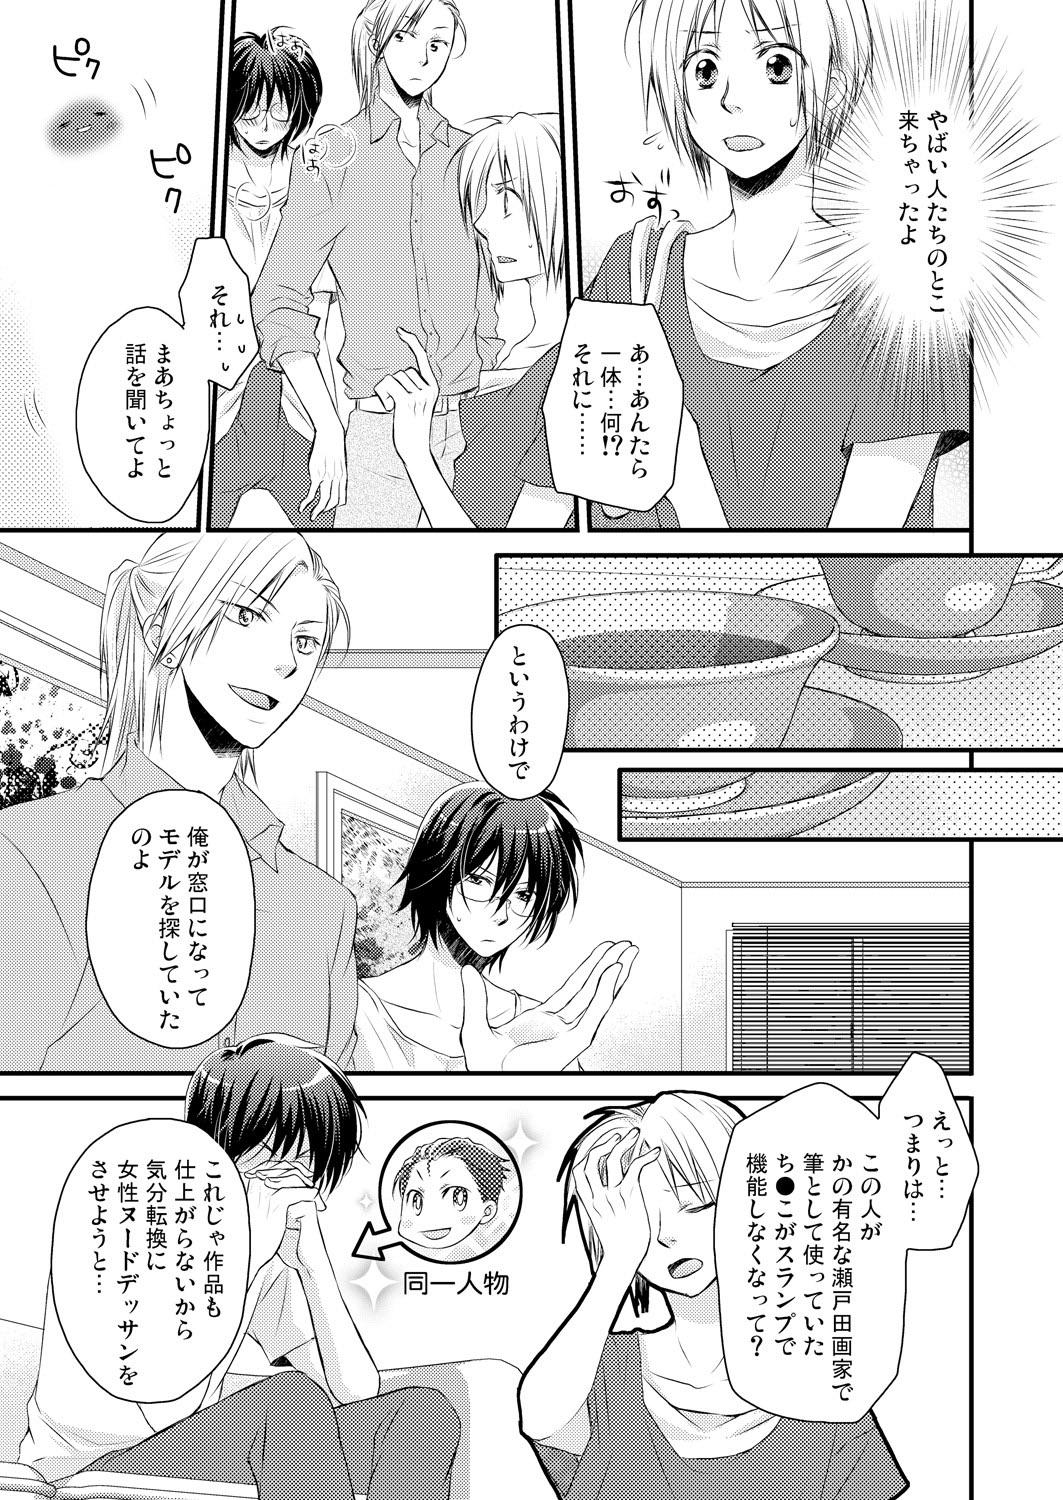 Gostoso 発情♂ゲイ術家～喘ぎアートはシモの筆で～ Made - Page 11